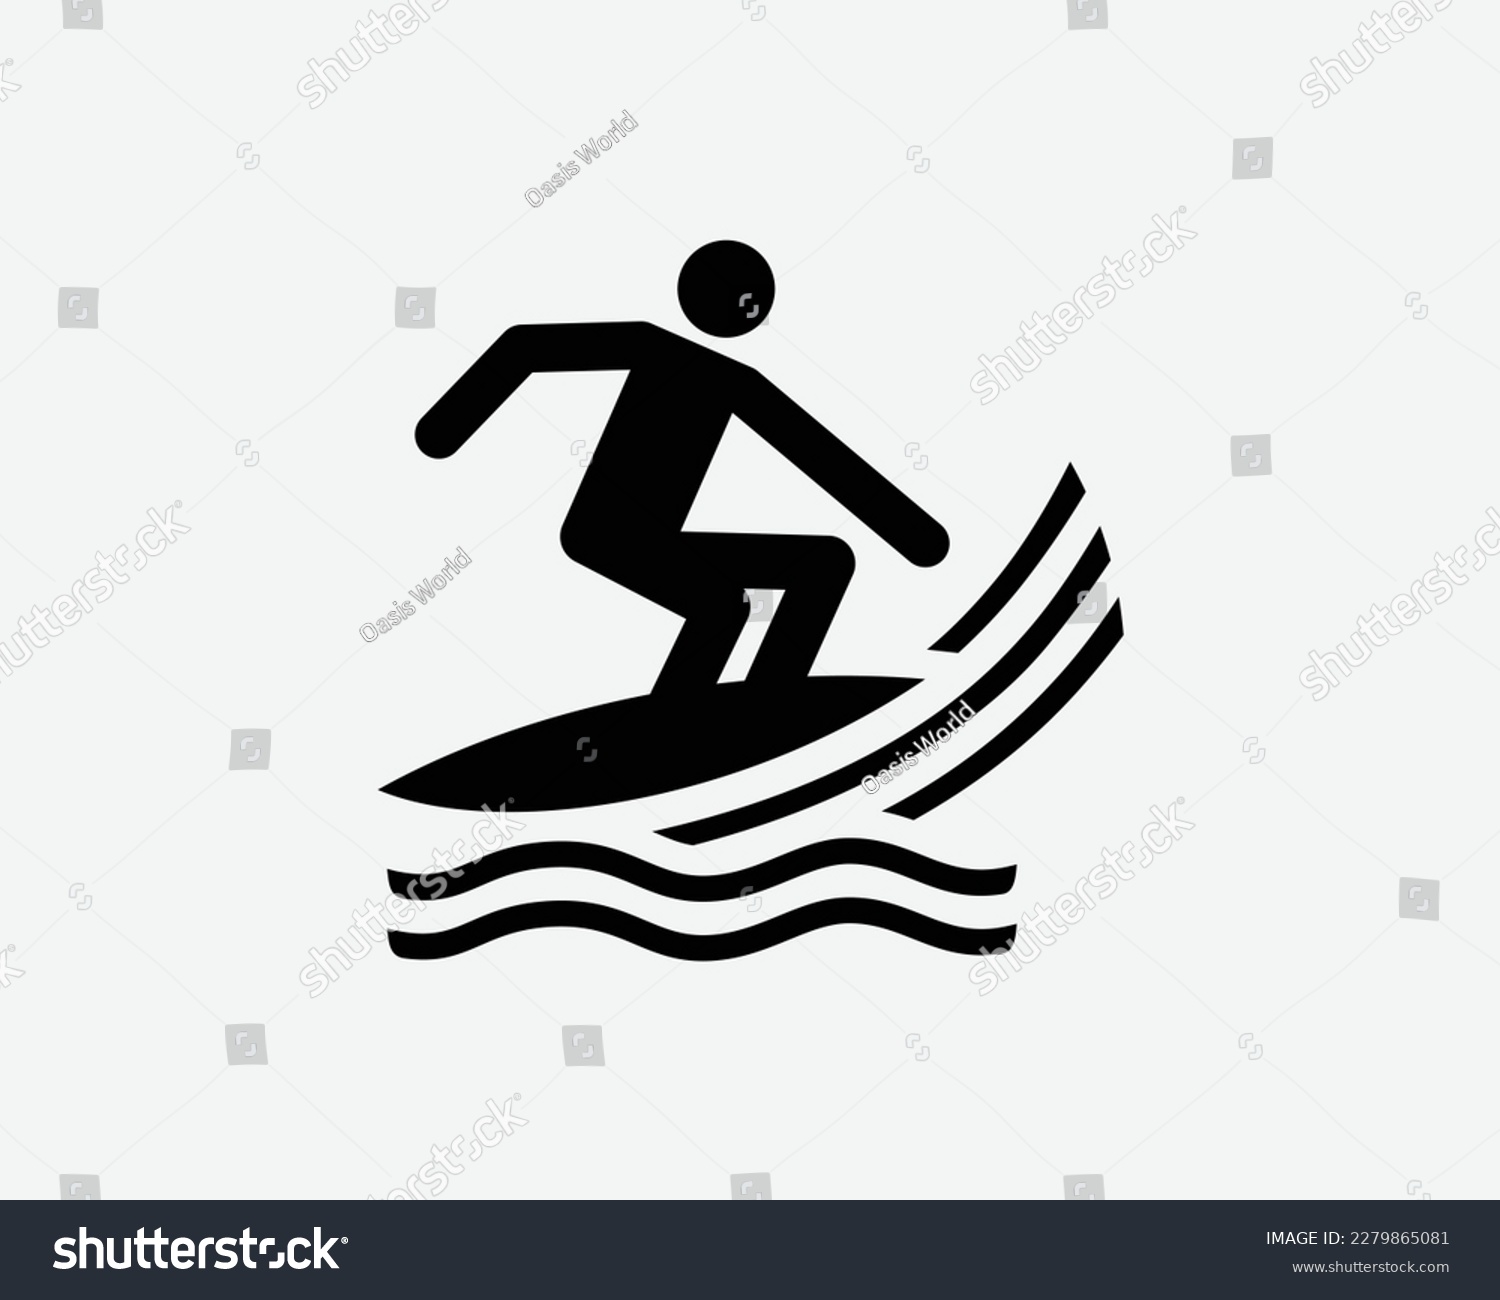 SVG of Surfing Icon Surf Boarding Board Surfer Water Sports Activity Vector Black White Silhouette Symbol Sign Graphic Clipart Artwork Illustration Pictogram svg